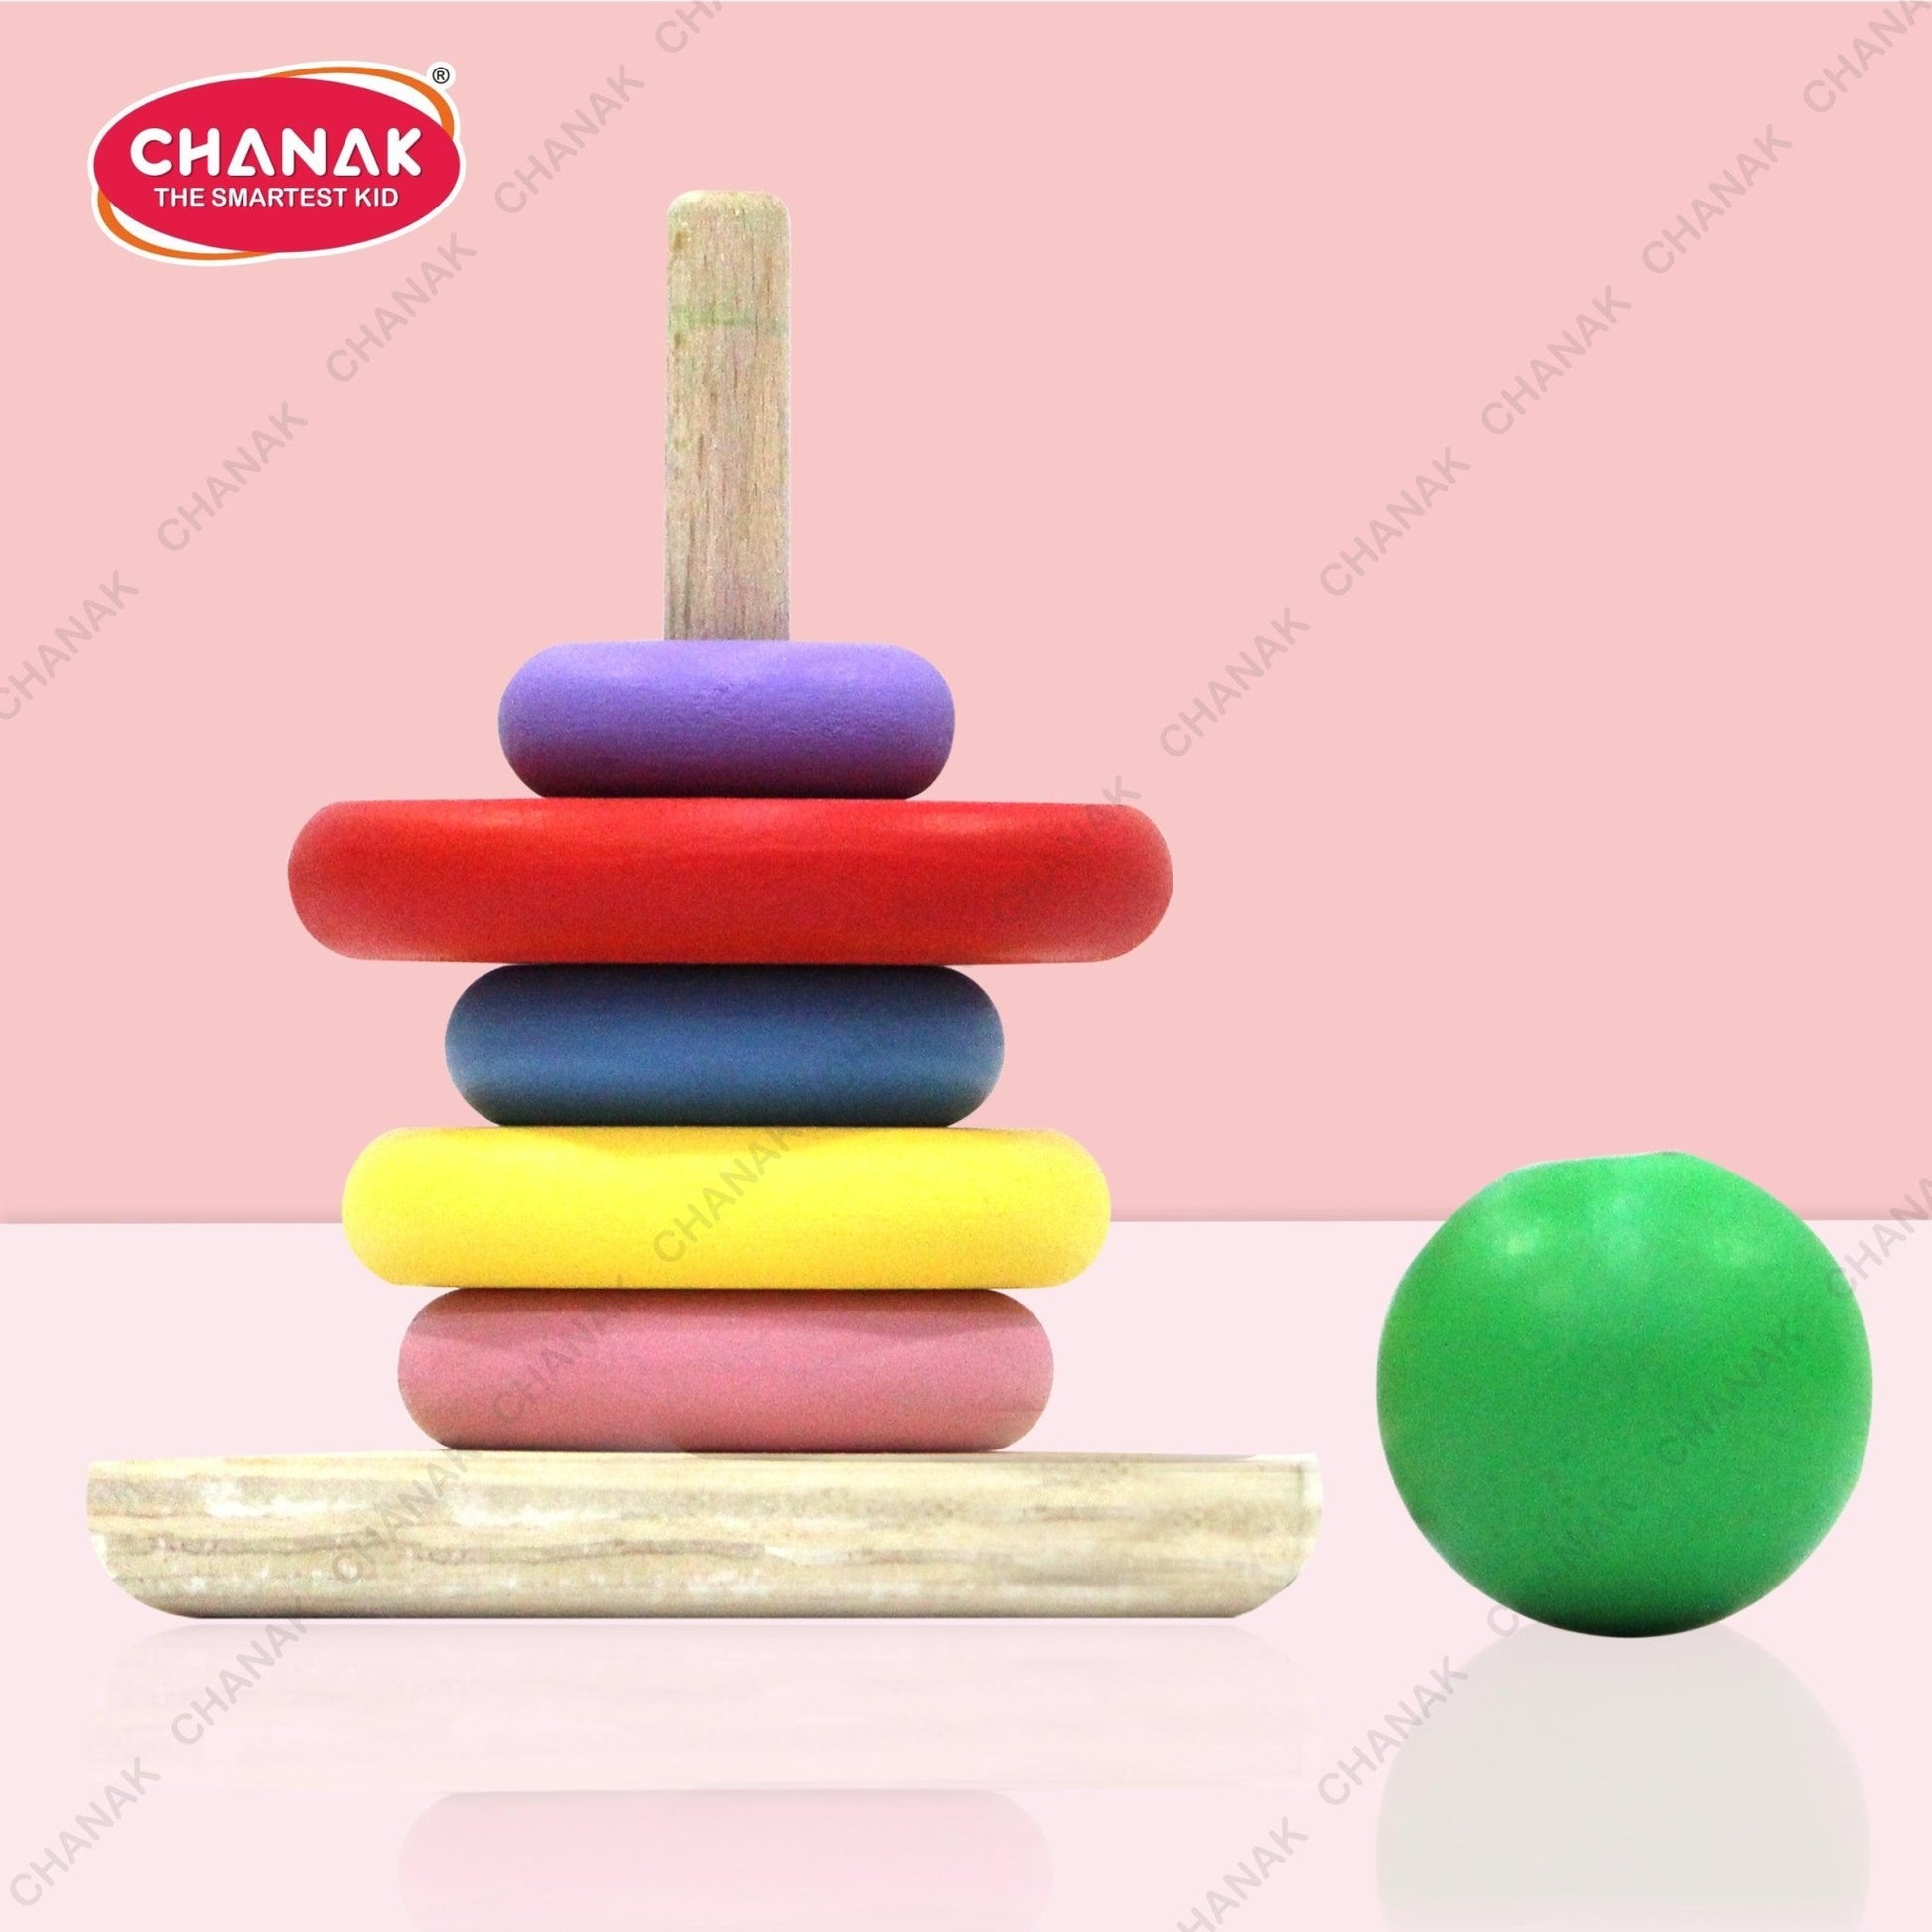 Chanak Wooden Stacking Ring Toy for Kids - Rainbow Colour - chanak